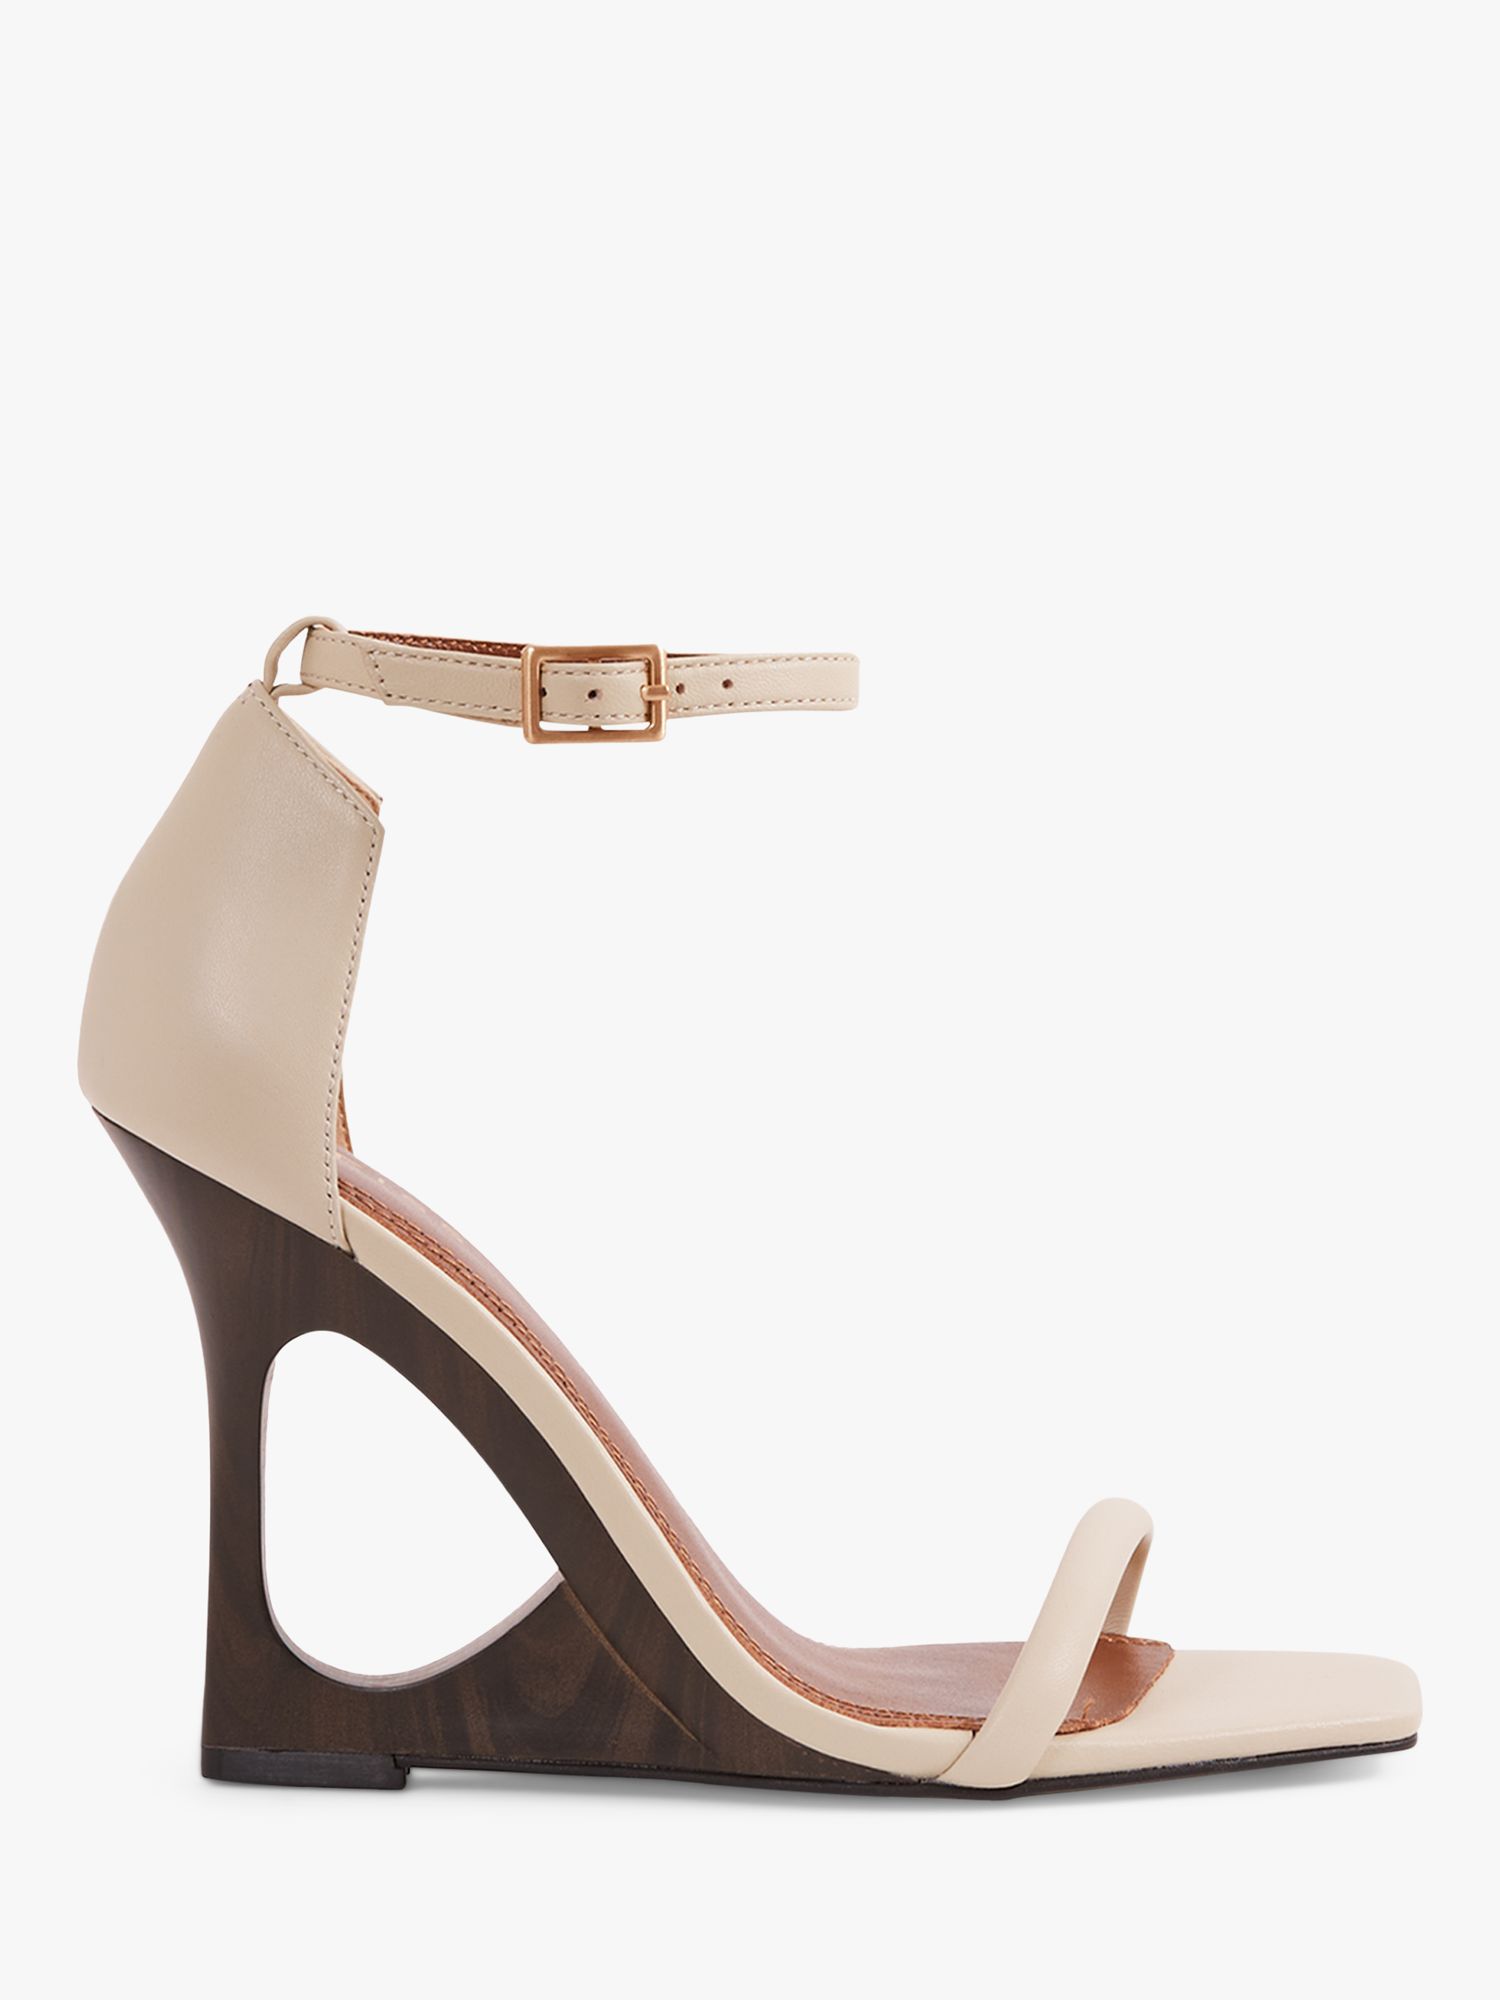 Reiss Cora Sculptural Wedge Heel Leather Sandals, Off White, 3